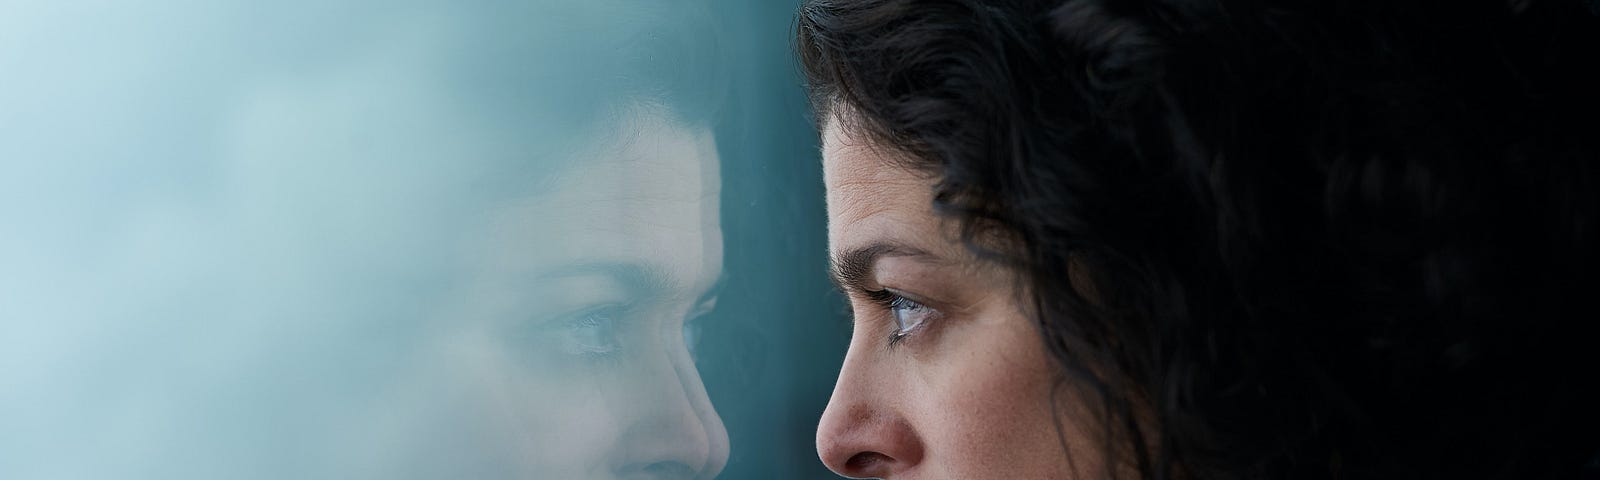 Person looking intensely through their reflection